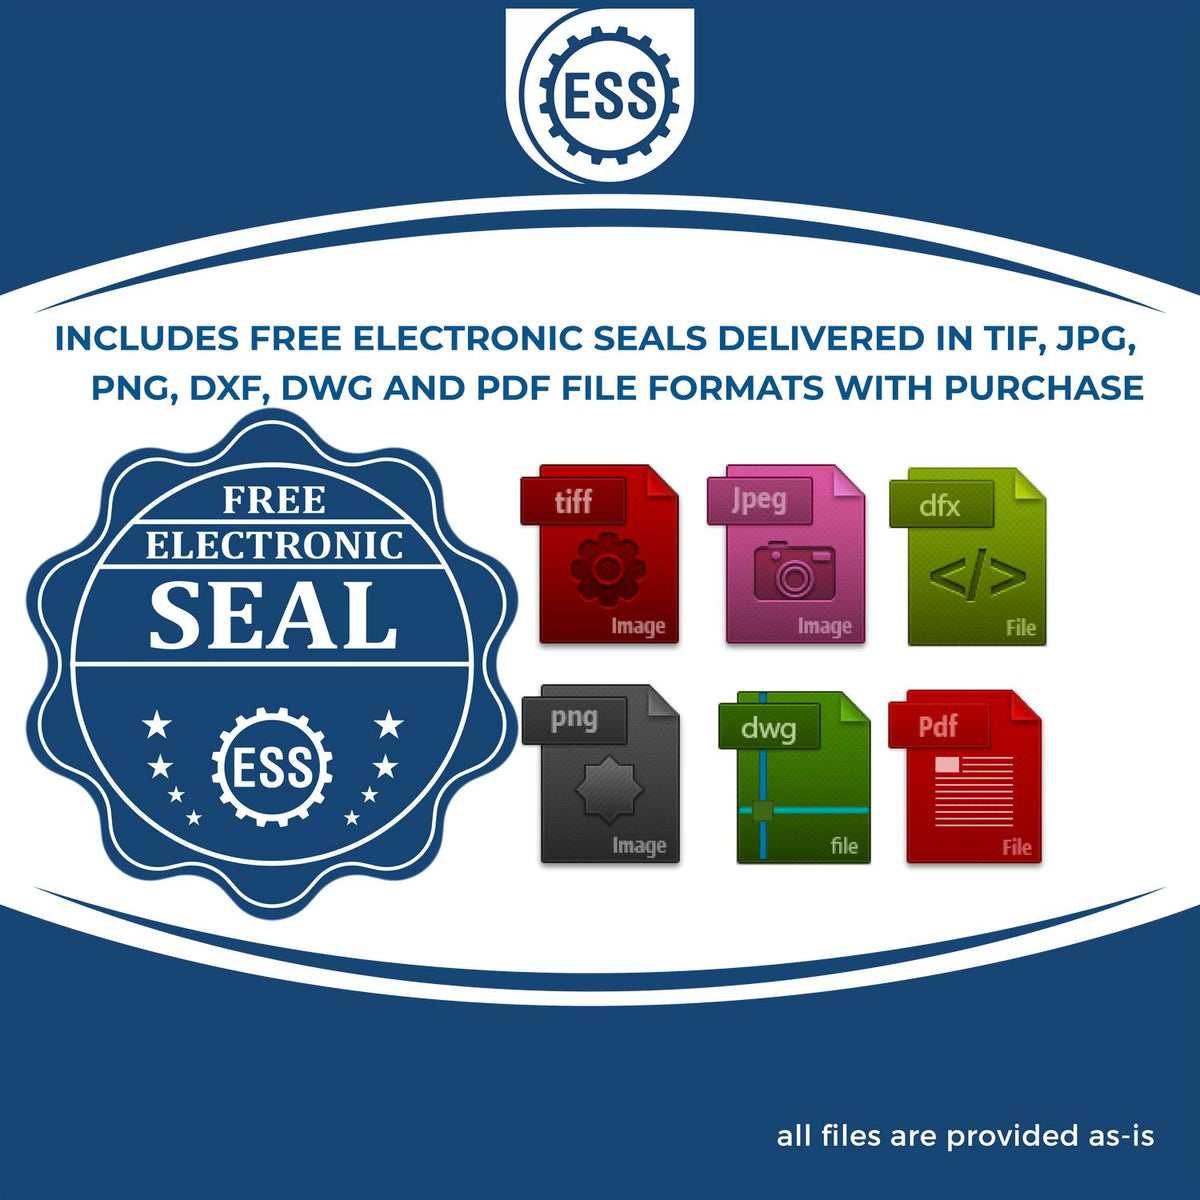 An infographic for the free electronic seal for the Hybrid Idaho Geologist Seal illustrating the different file type icons such as DXF, DWG, TIF, JPG and PNG.